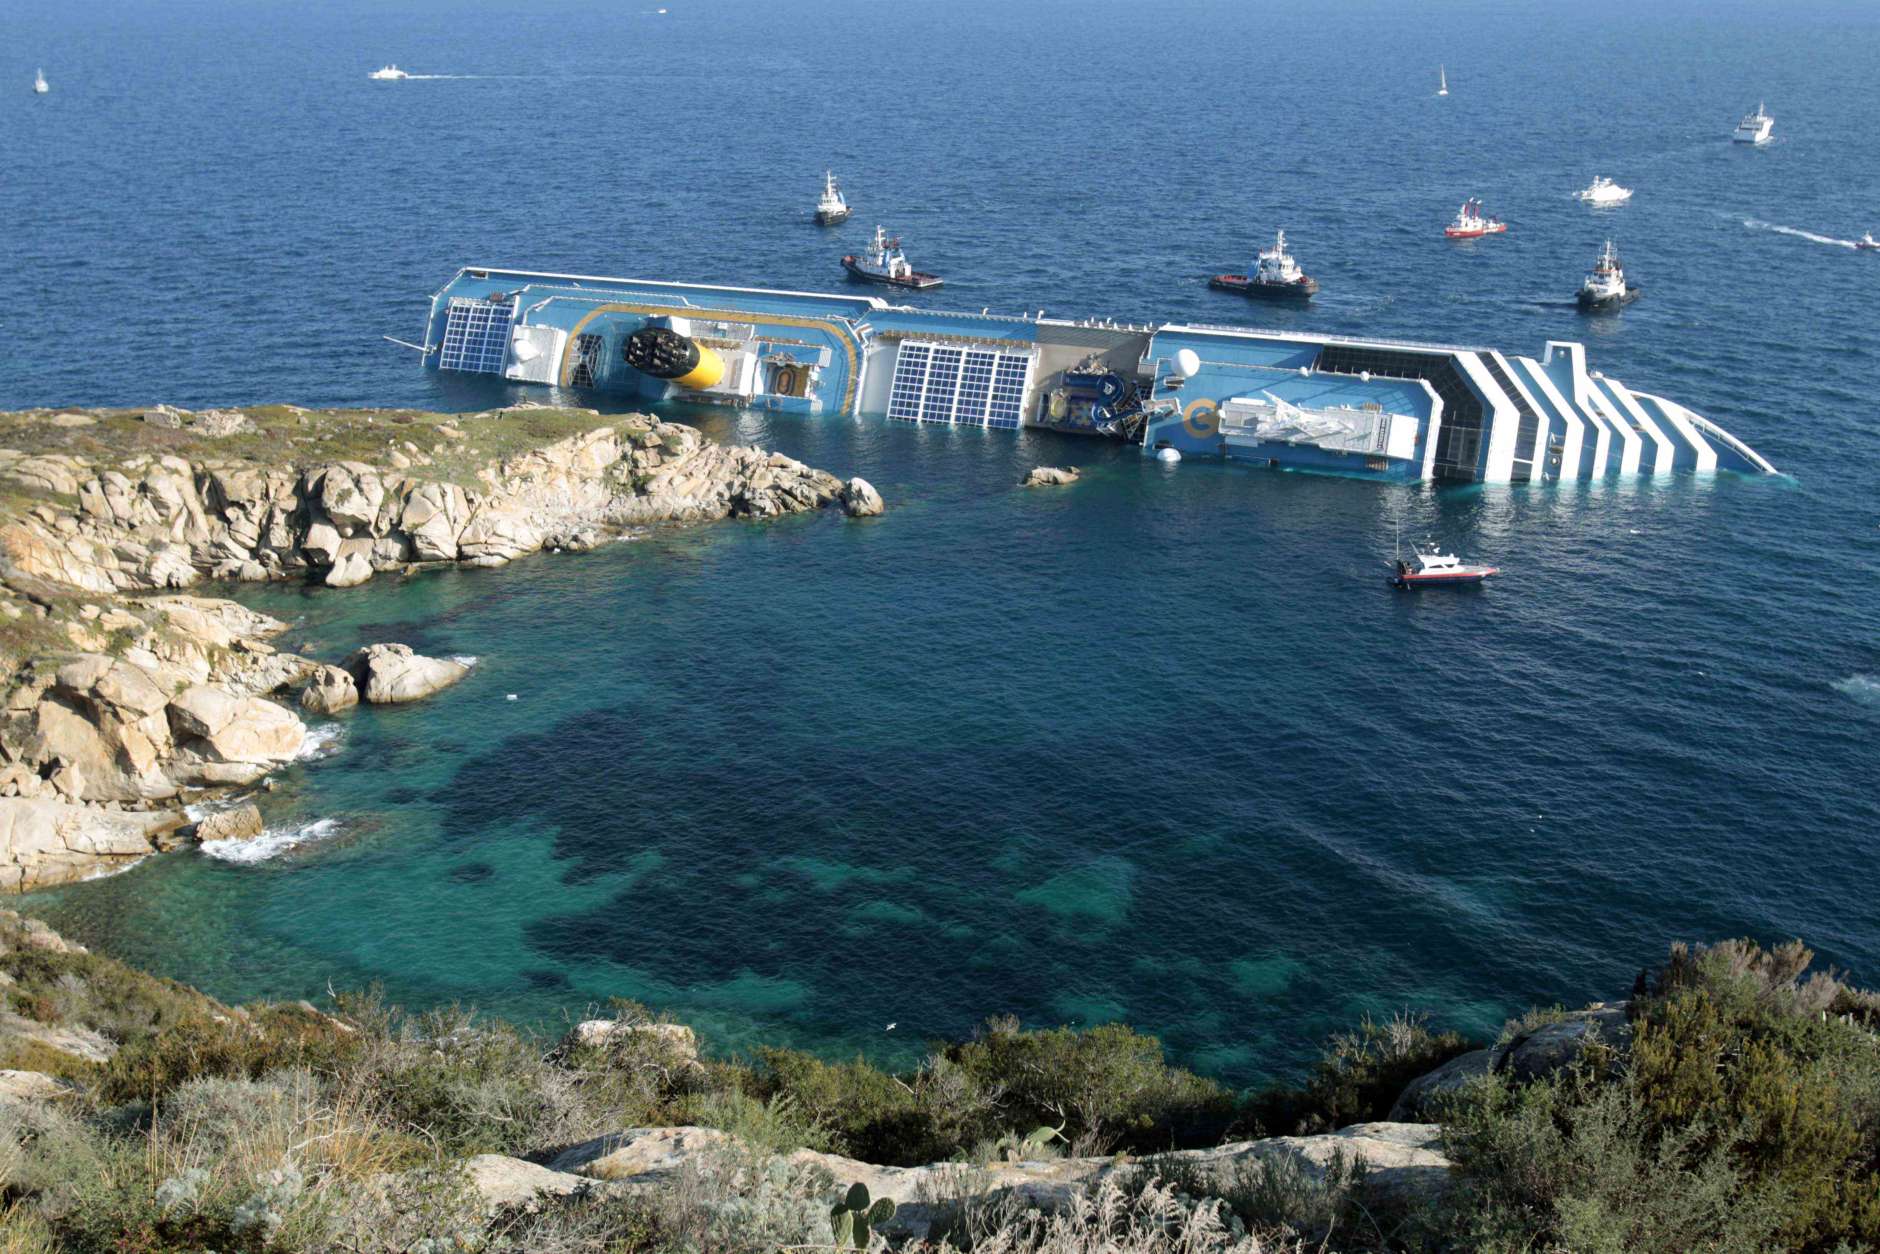 FILE - In this Jan. 14, 2012 file photo the luxury cruise ship Costa Concordia leans on its side after running aground in the tiny Tuscan island of Giglio, Italy. The captain of the shipwrecked Costa Concordia cruise ship Francesco Schettino was convicted Tuesday, May 31, 2016, of multiple charges of manslaughter and sentenced to 16 years in jail, Italian court officials said. (AP Photo/Gregorio Borgia, File)